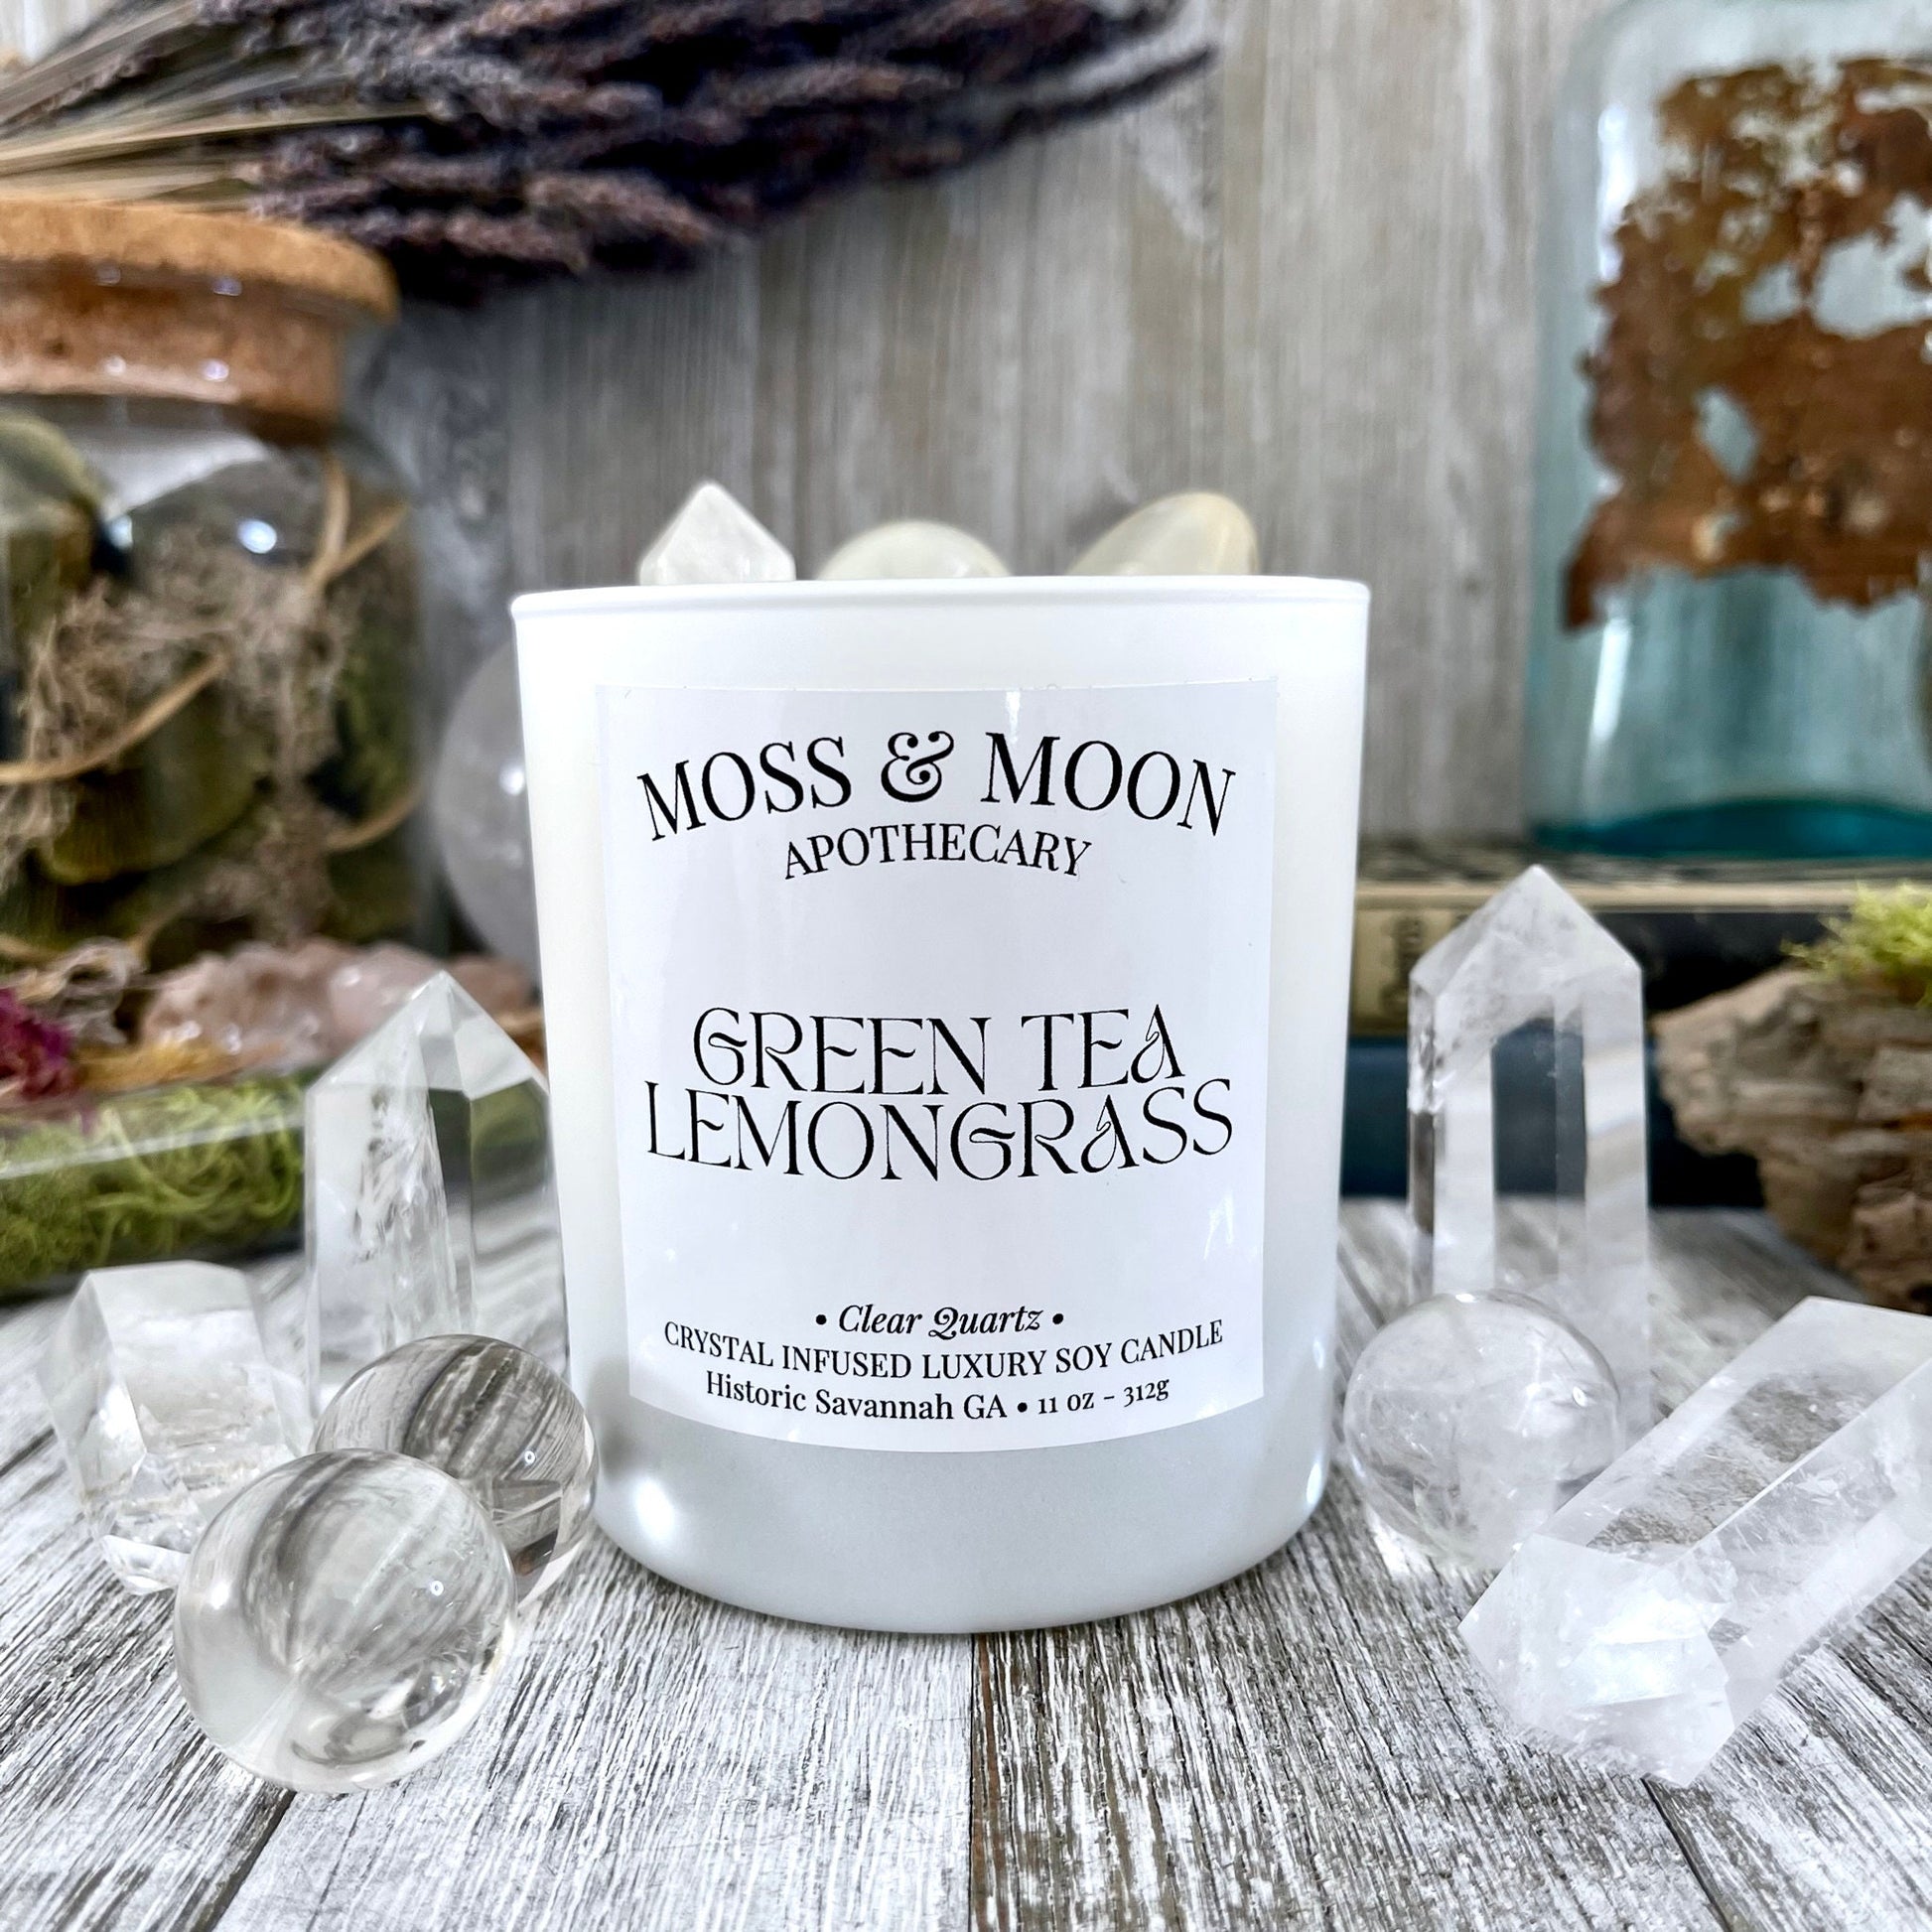 aromatherapy candle, Candles, Candles & Holders, clear quartz, Container Candles, crystal candle, Crystal Candles, crystal healing, eco-friendly candle, Etsy ID: 1480261705, Green Tea candle, handmade candle, Home & Living, Home Decor, Lemongrass Candle,